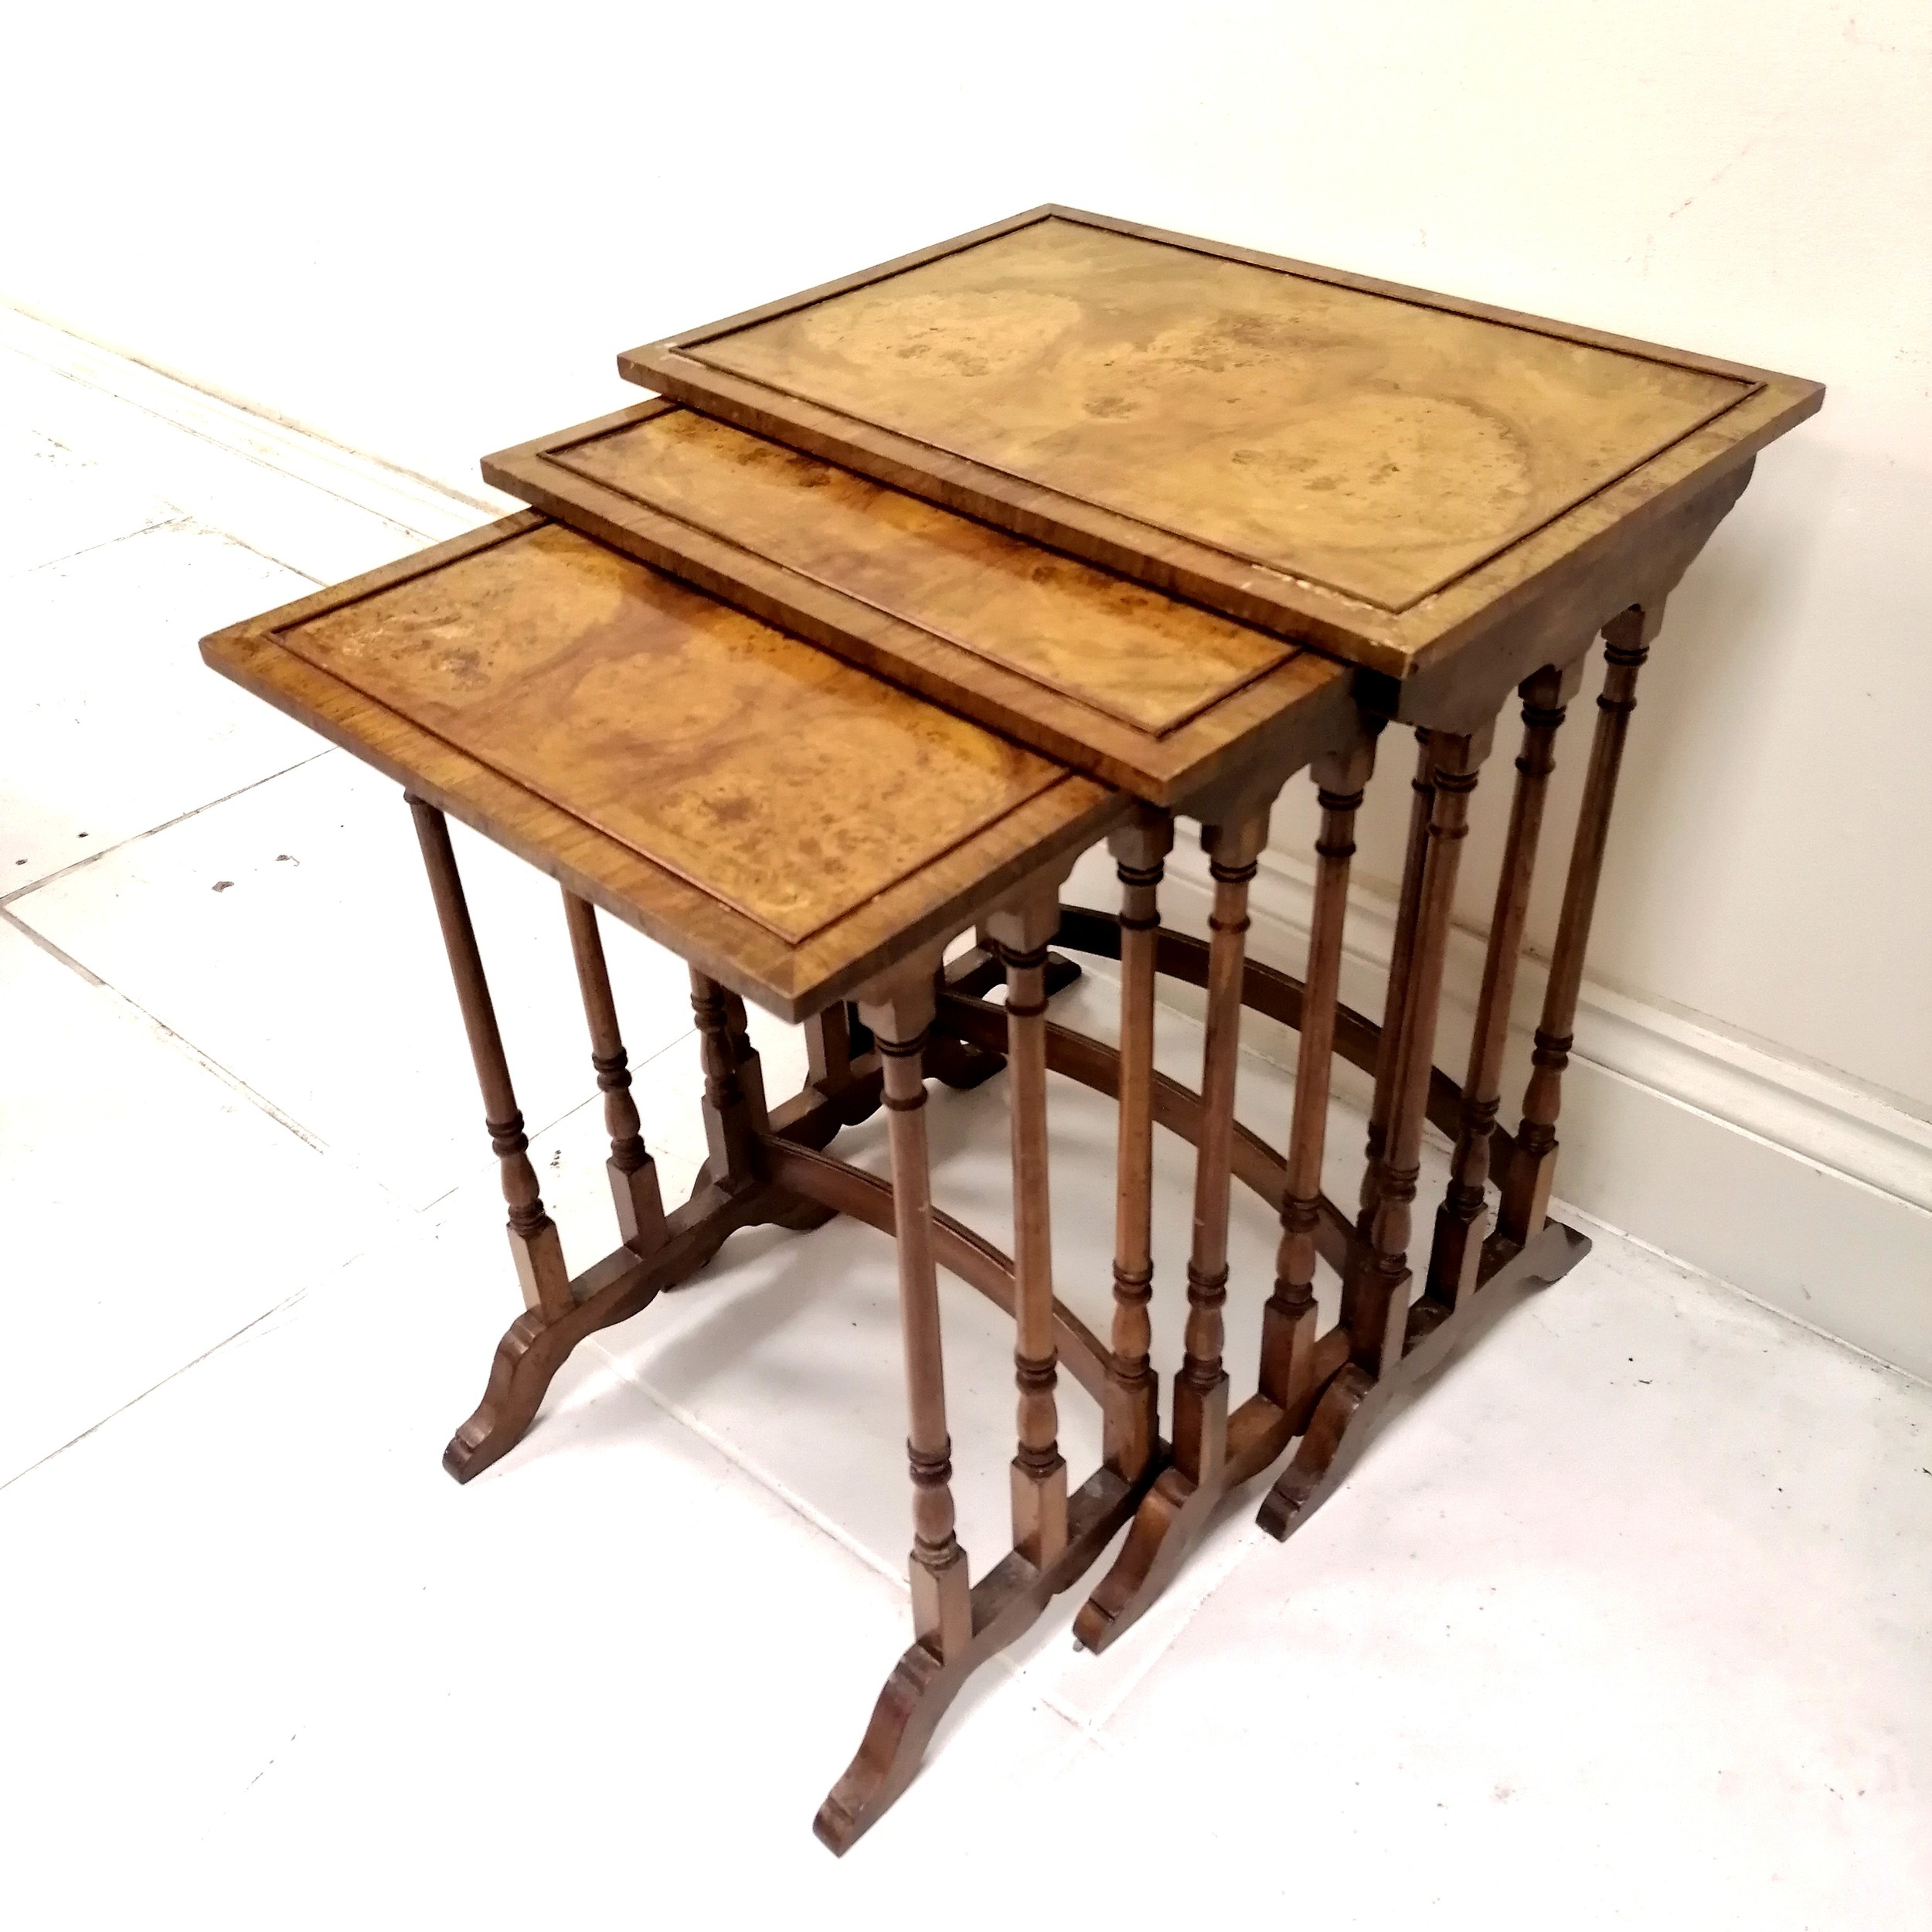 Nest of 3 Walnut reproduction tables - 51cm wide x 35cm deep x 60cm high & in used condition